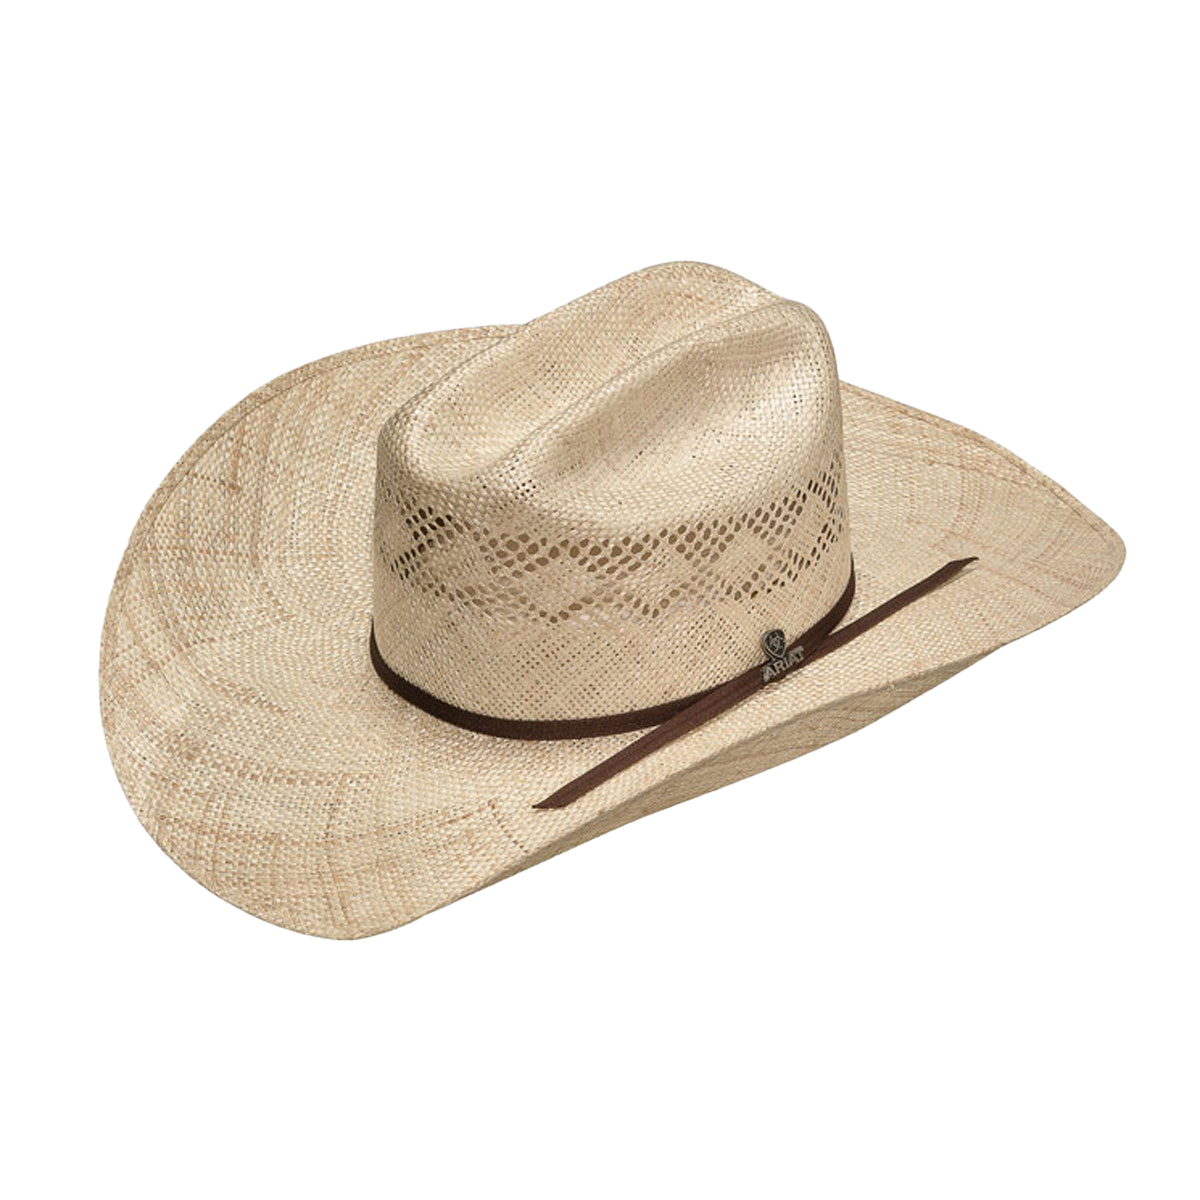 Ariat Unisex Natural Twisted Weave Straw Cowboy Hat A73148